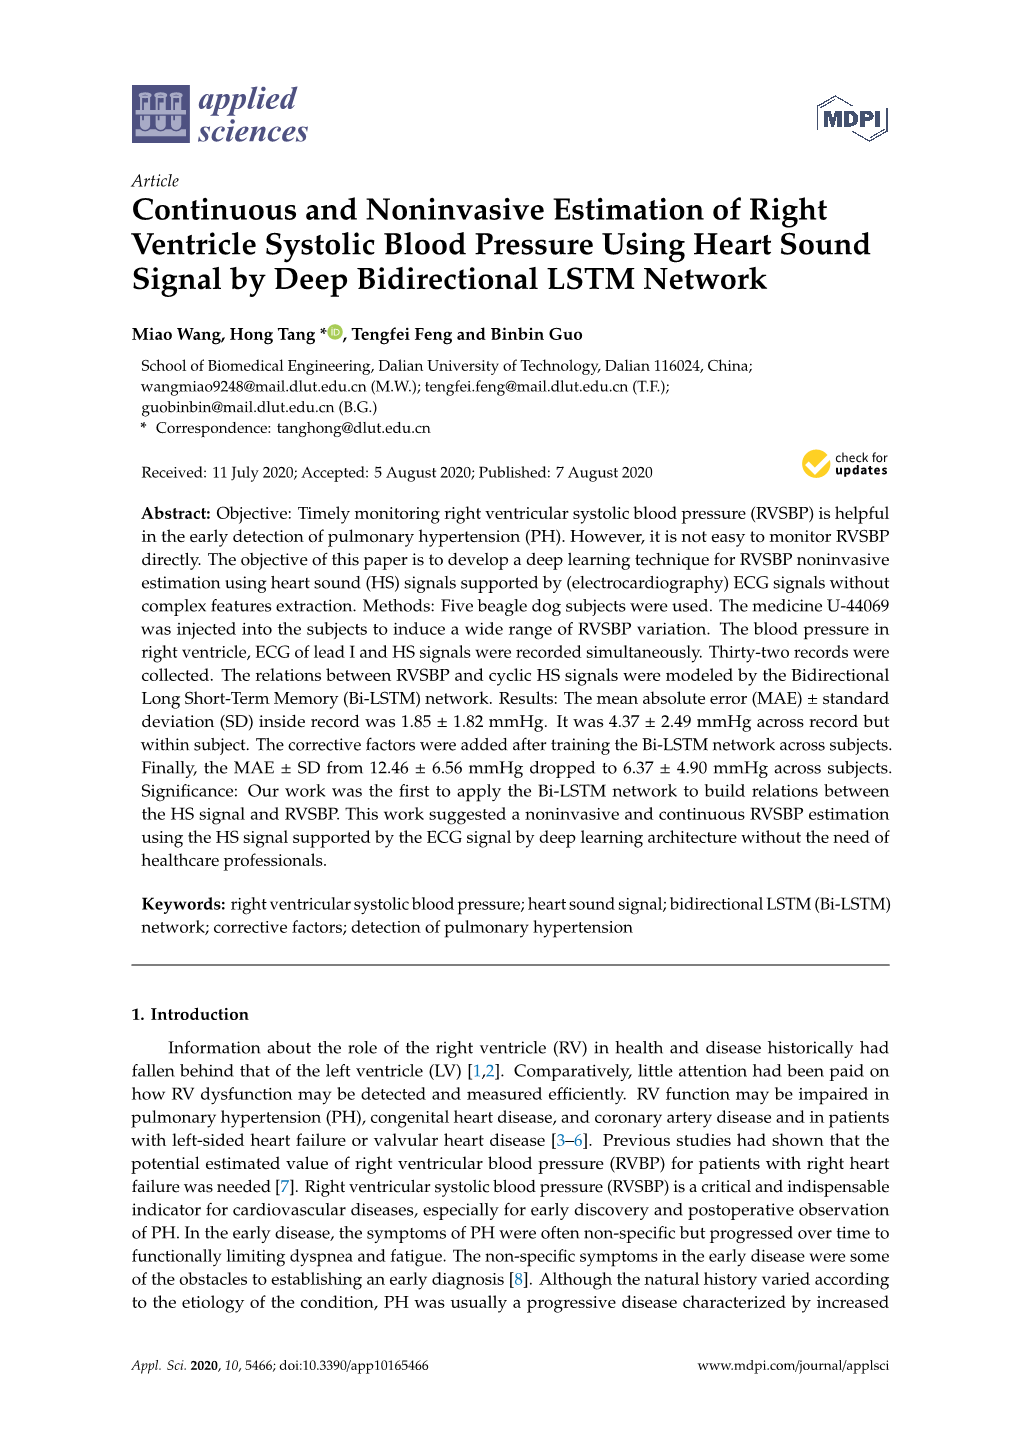 Continuous and Noninvasive Estimation of Right Ventricle Systolic Blood Pressure Using Heart Sound Signal by Deep Bidirectional LSTM Network